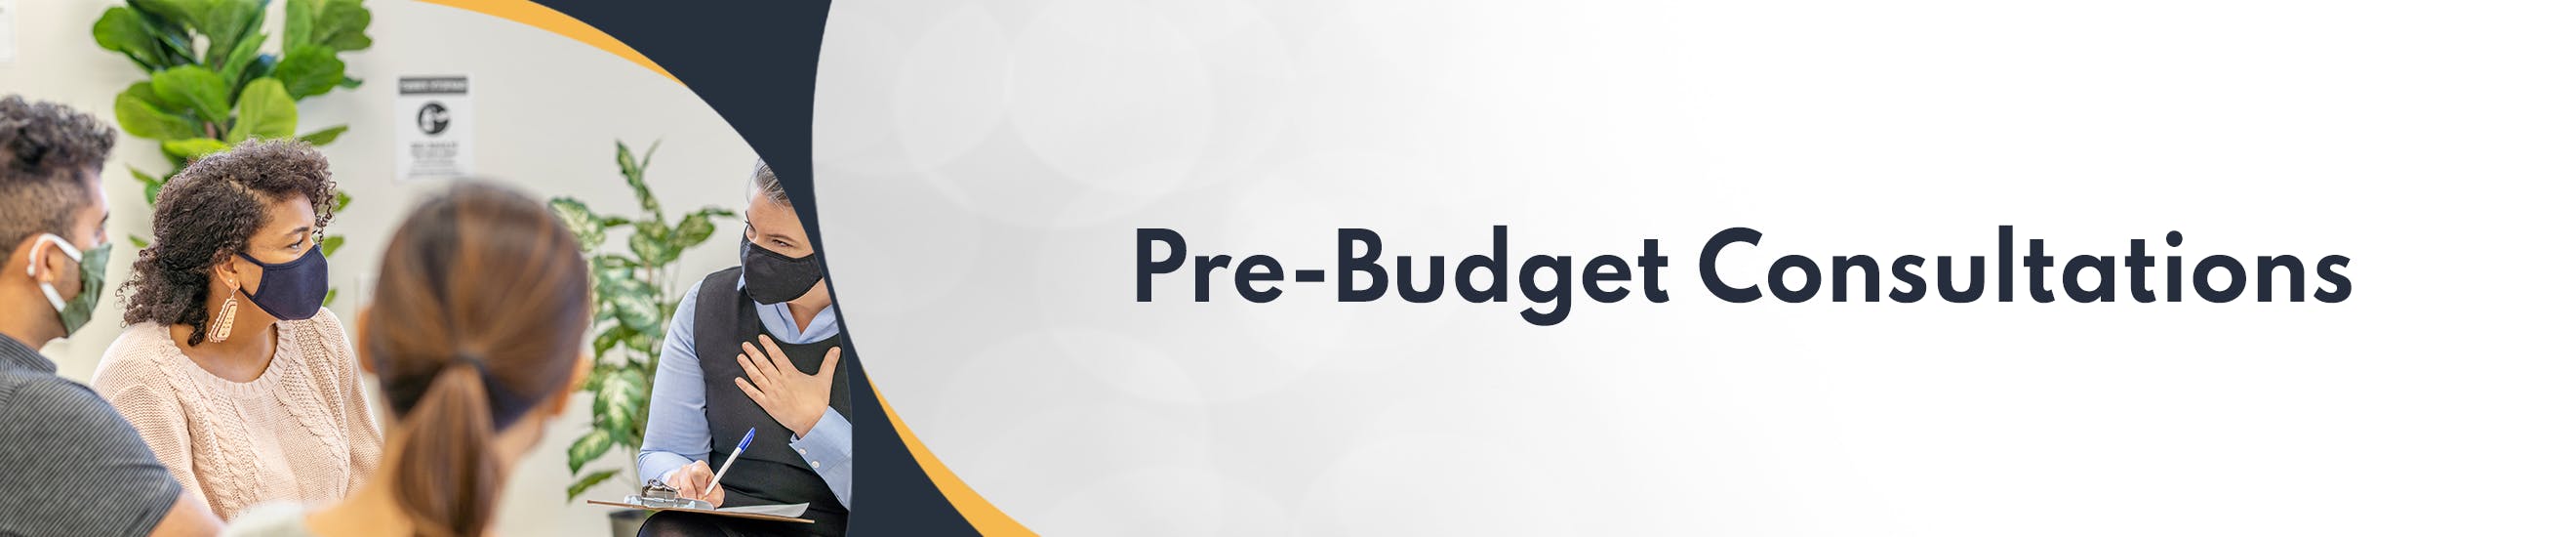 Pre budget consultations banner